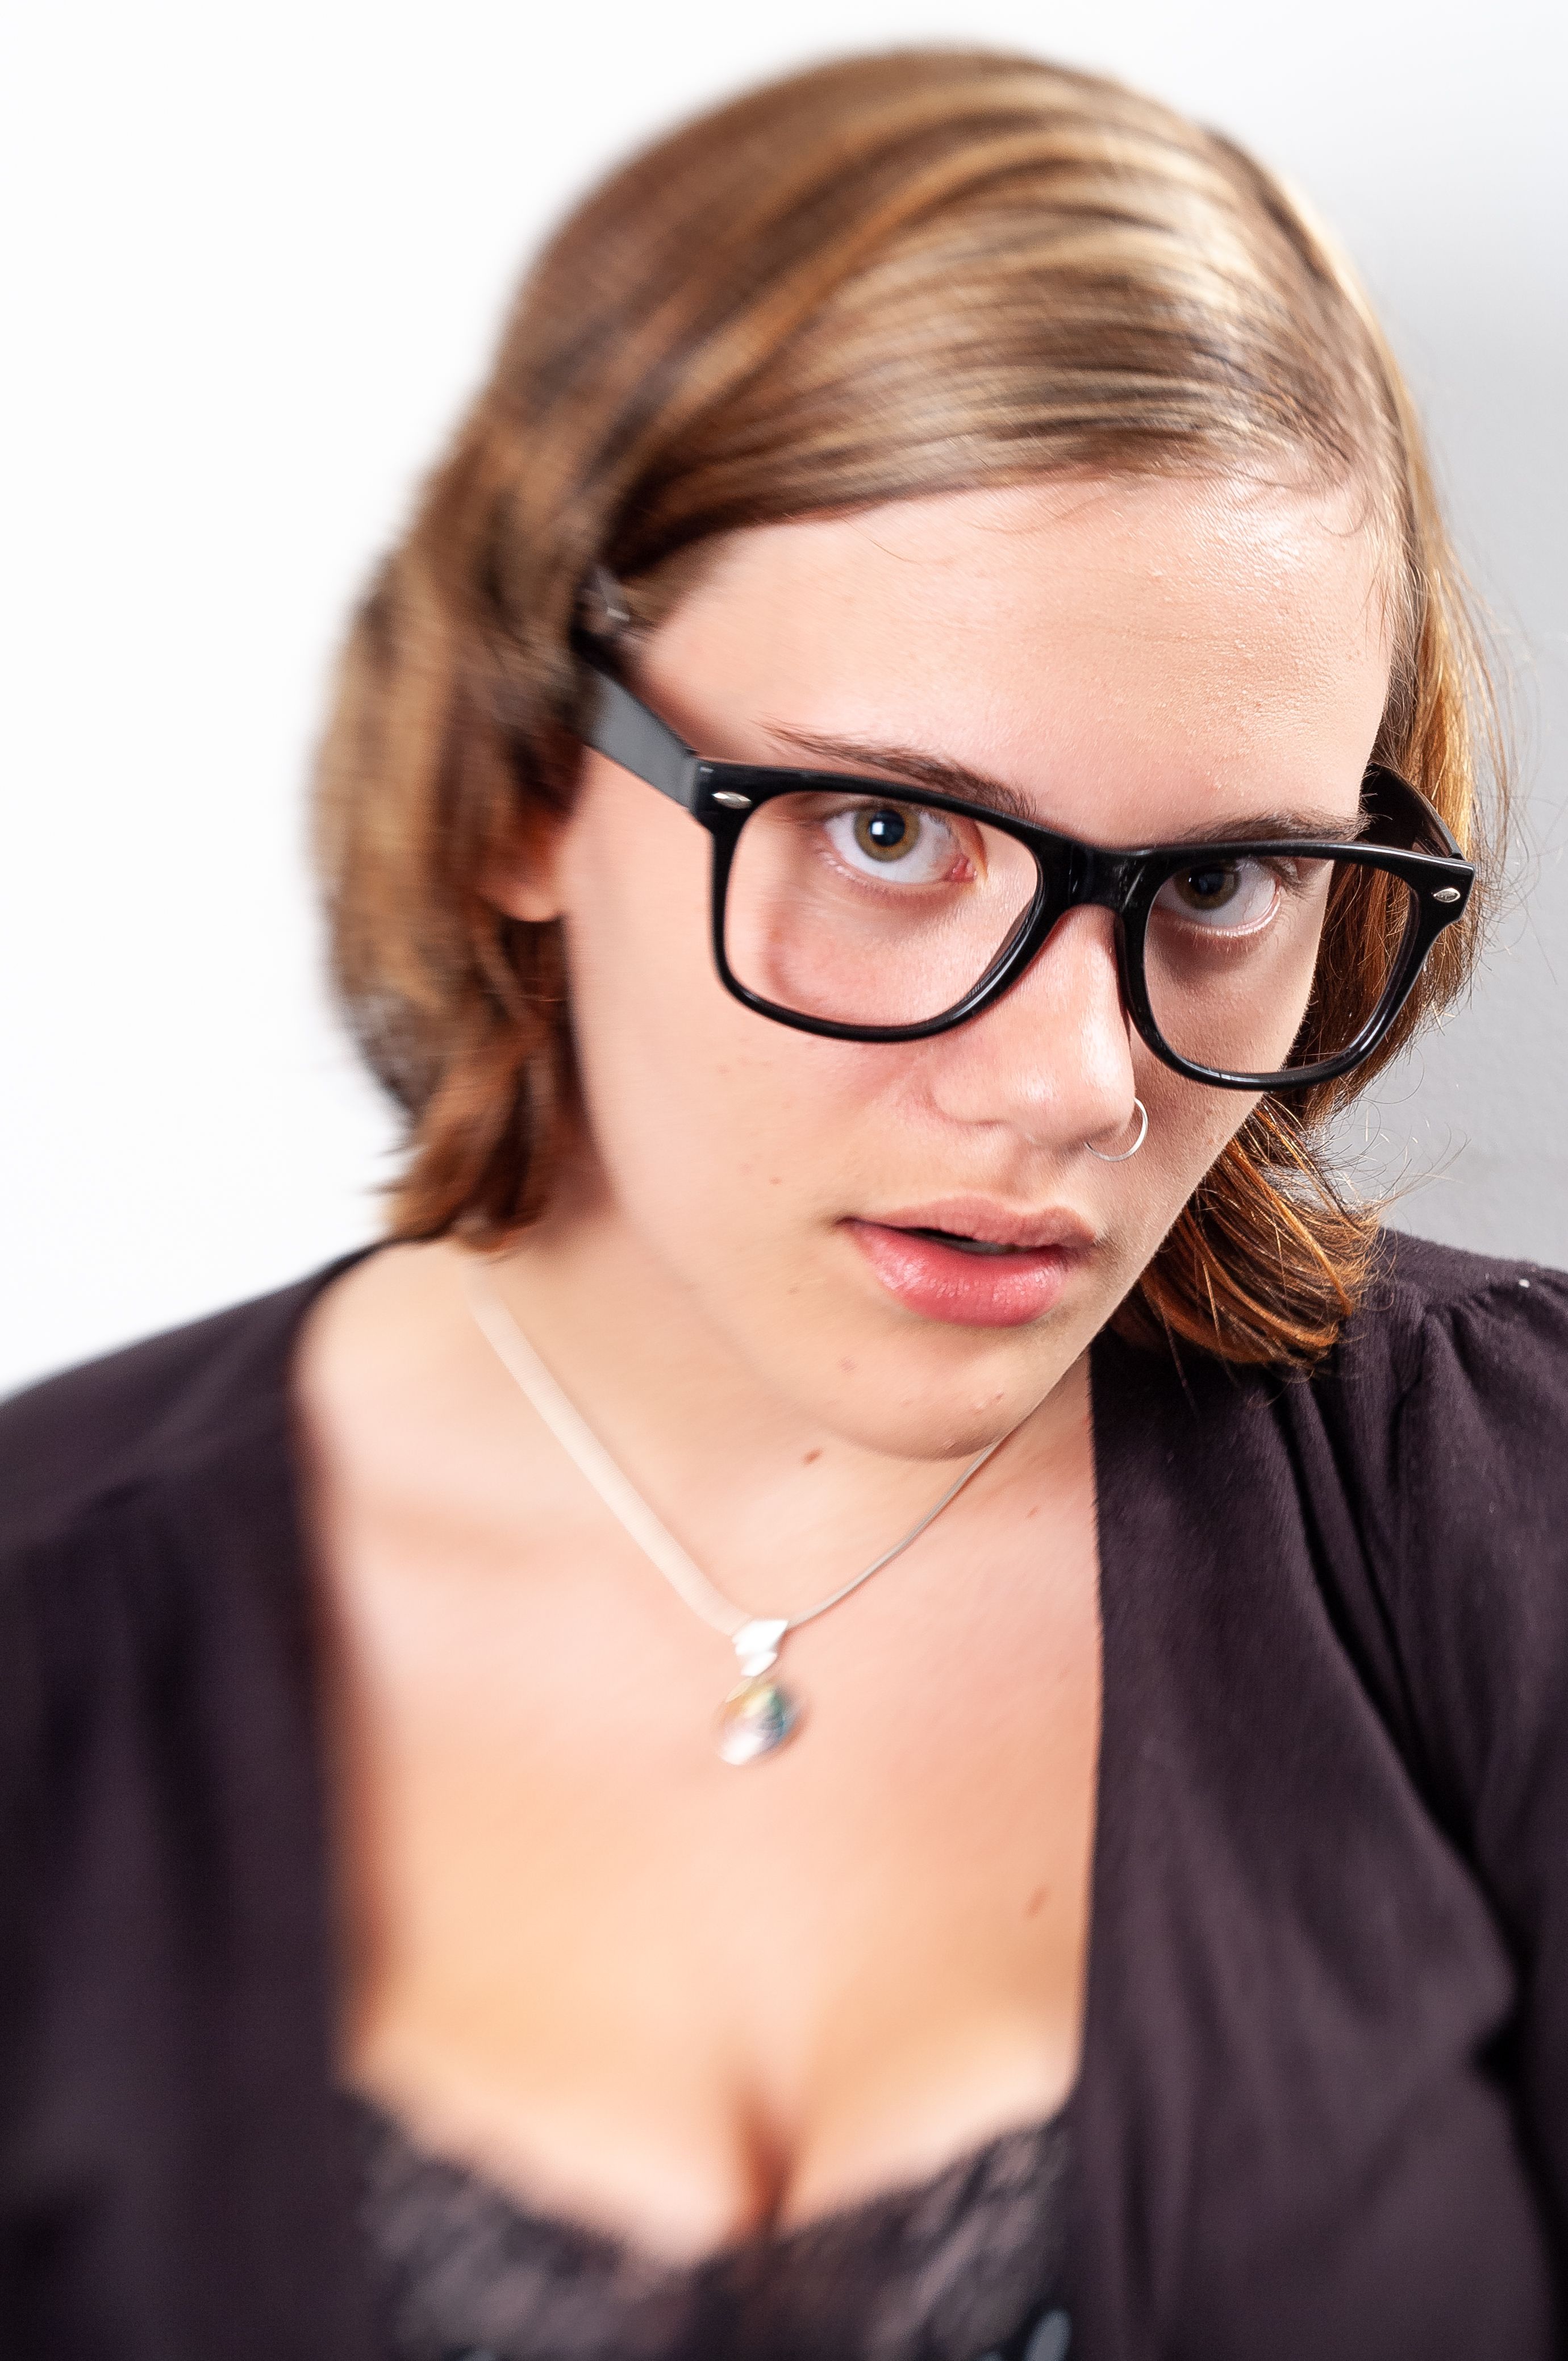 Portrait of female student with large black glasses